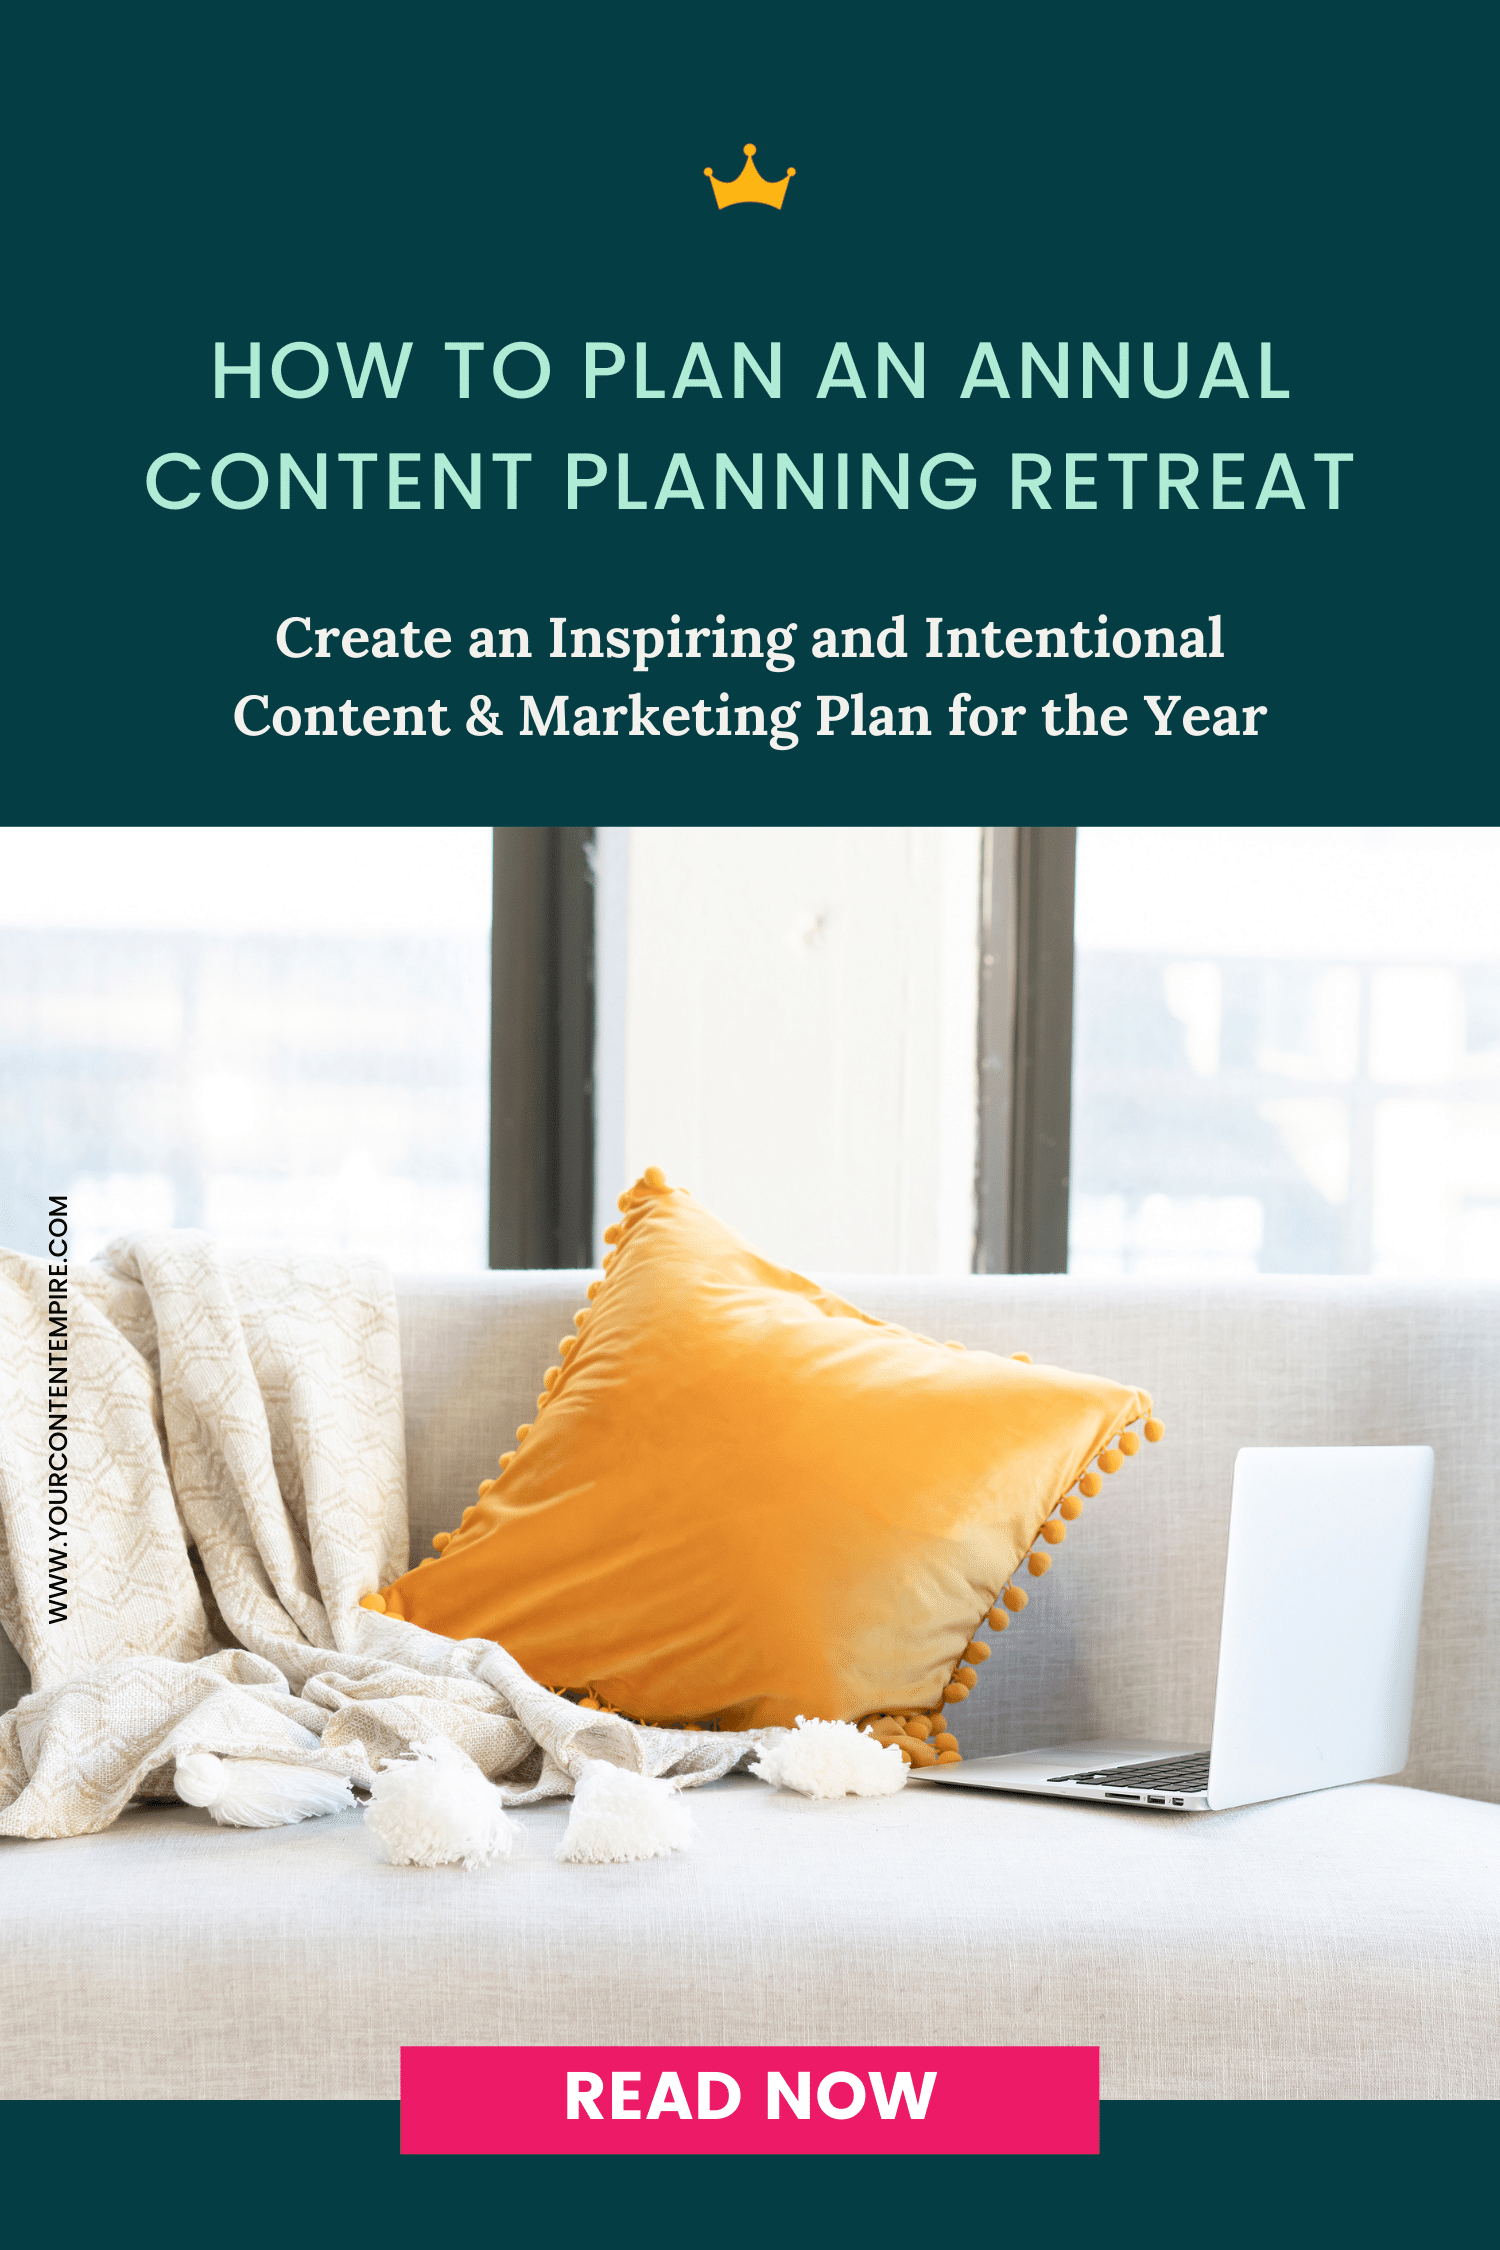 How to Plan an Annual Content Planning Retreat